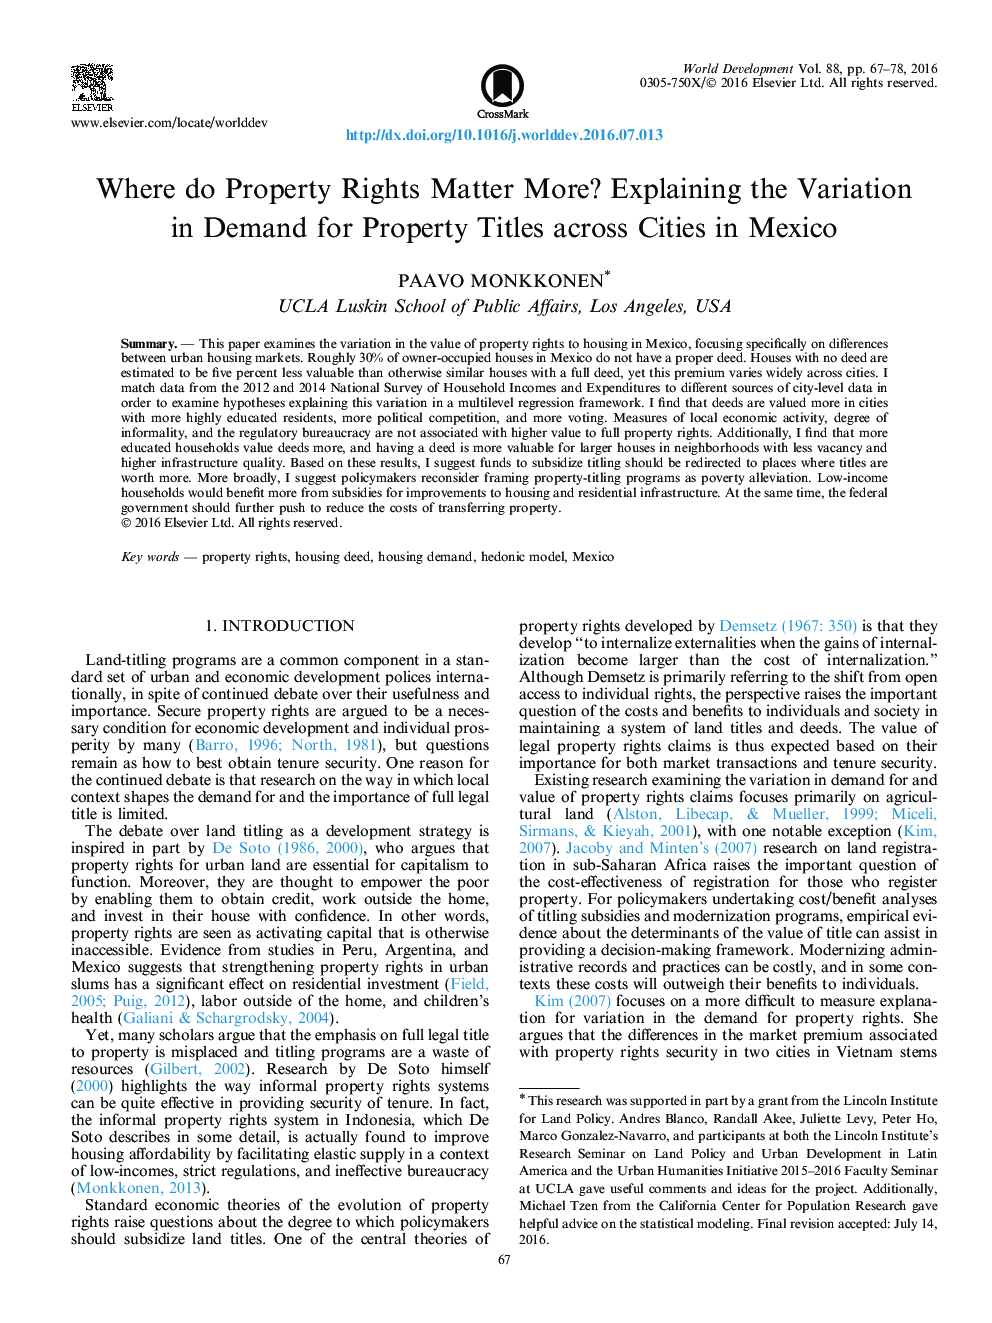 Where do Property Rights Matter More? Explaining the Variation in Demand for Property Titles across Cities in Mexico